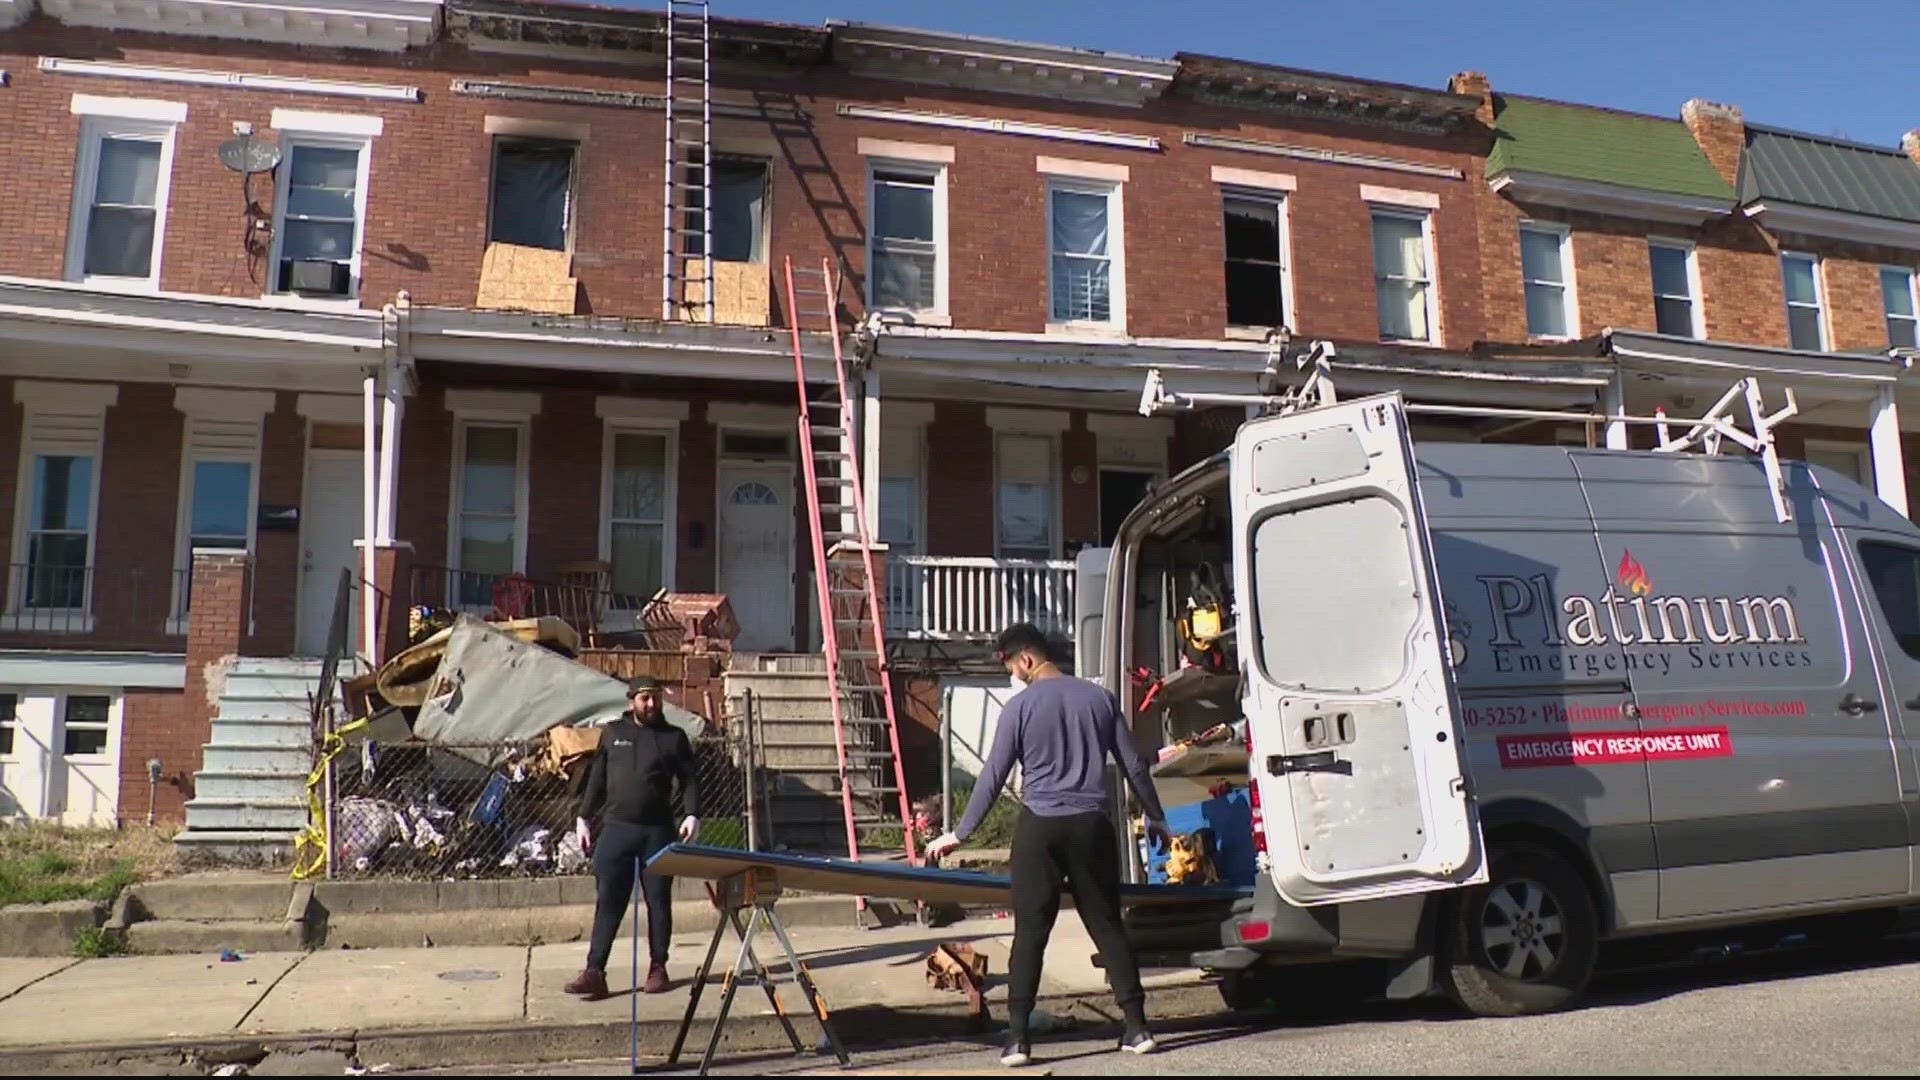 Three children died and two adults were injured Saturday morning in a fire at a home in Baltimore, authorities said.